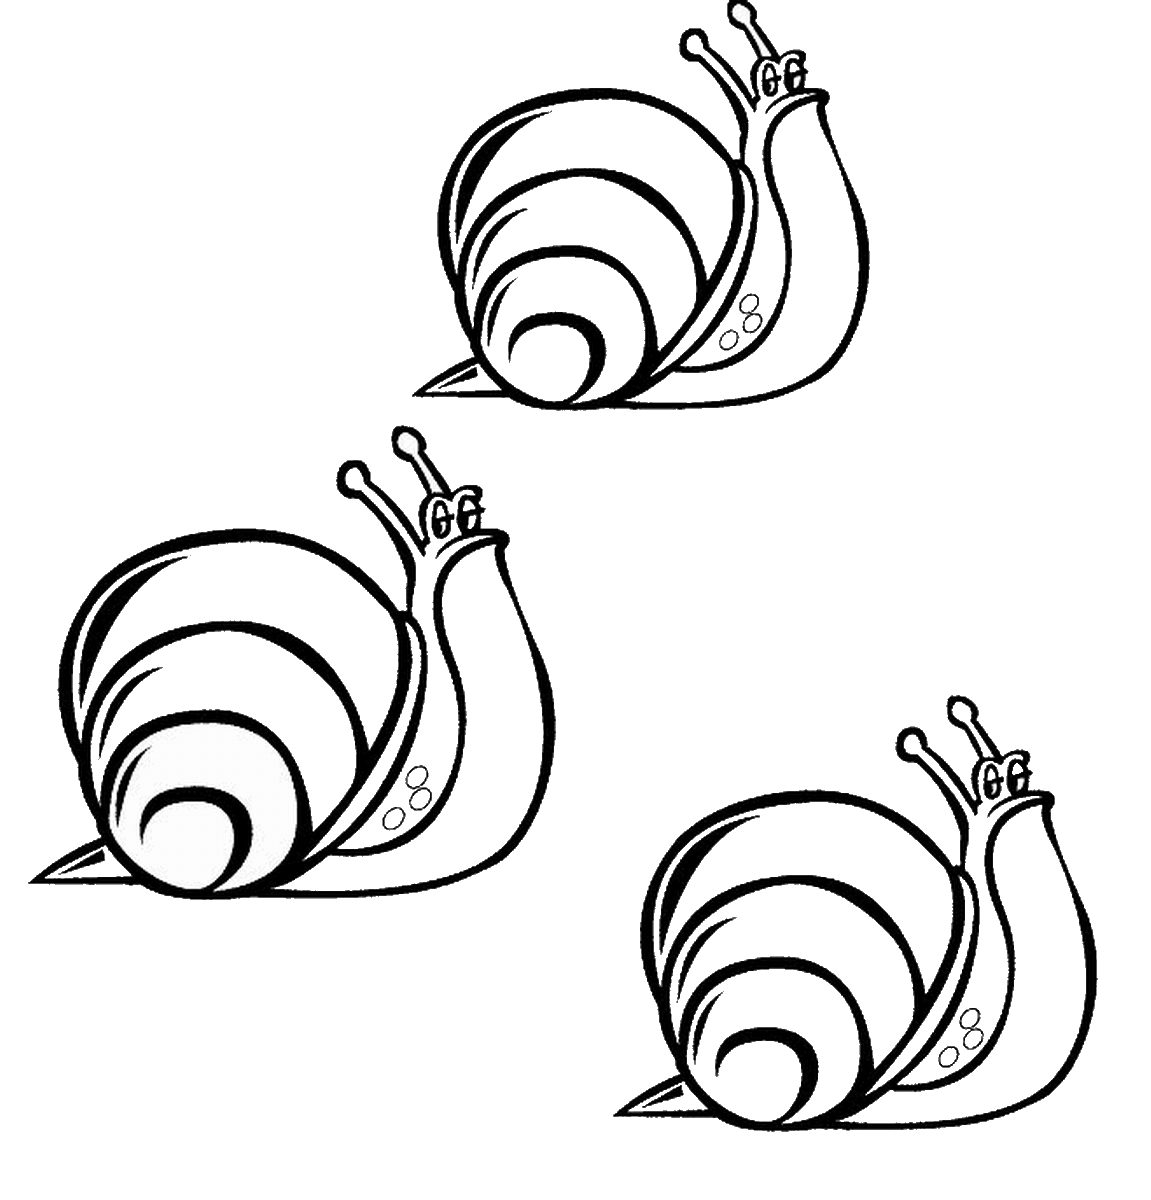 712 Cute Coloring Page Of A Snail for Kids